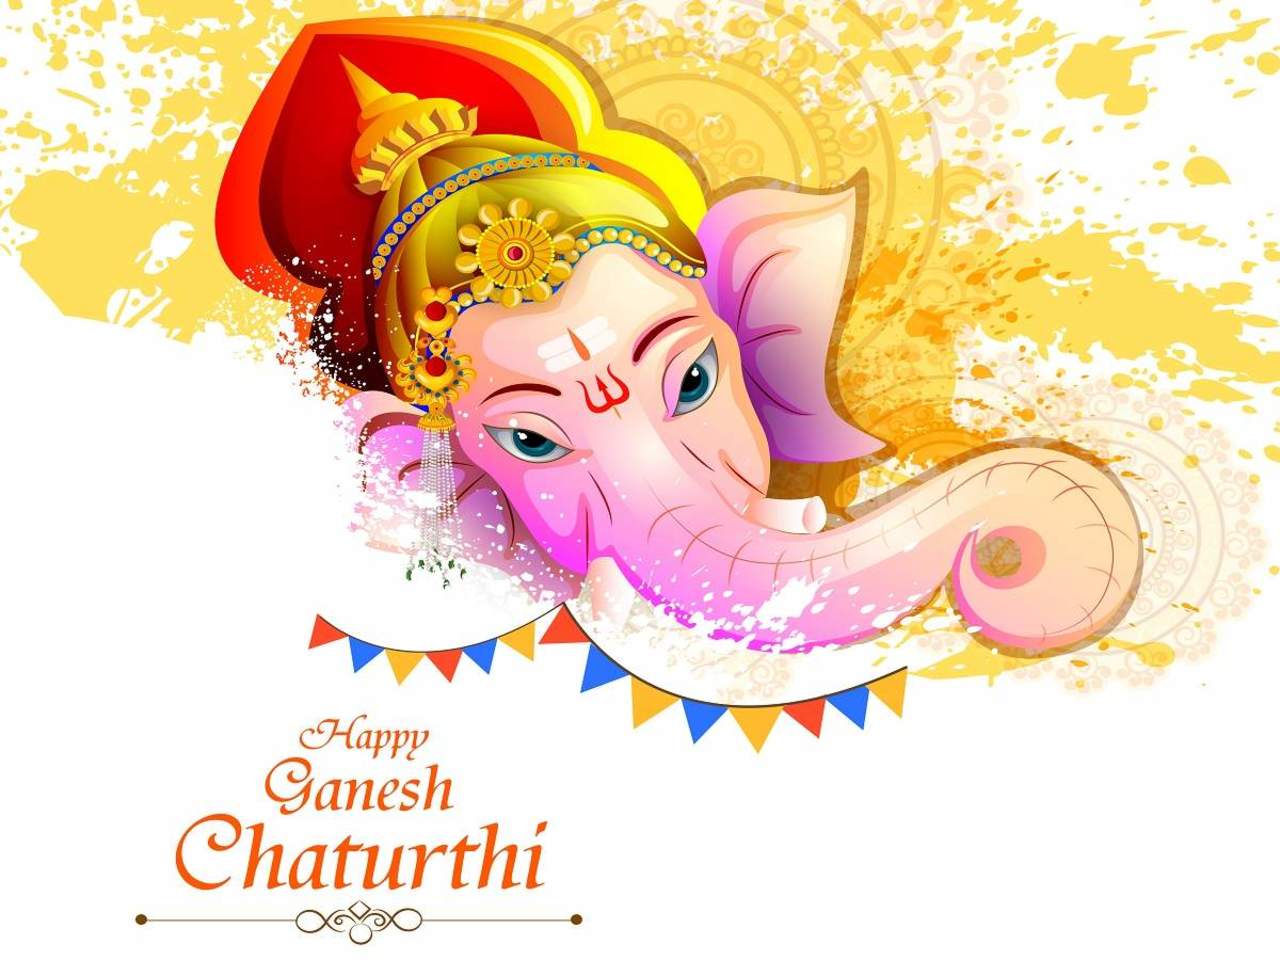 Happy Ganesha Chaturthi 2022: Wishes, Images, Quotes, Status, Messages,  Photos, SMS, Wallpaper, Pics and Greetings